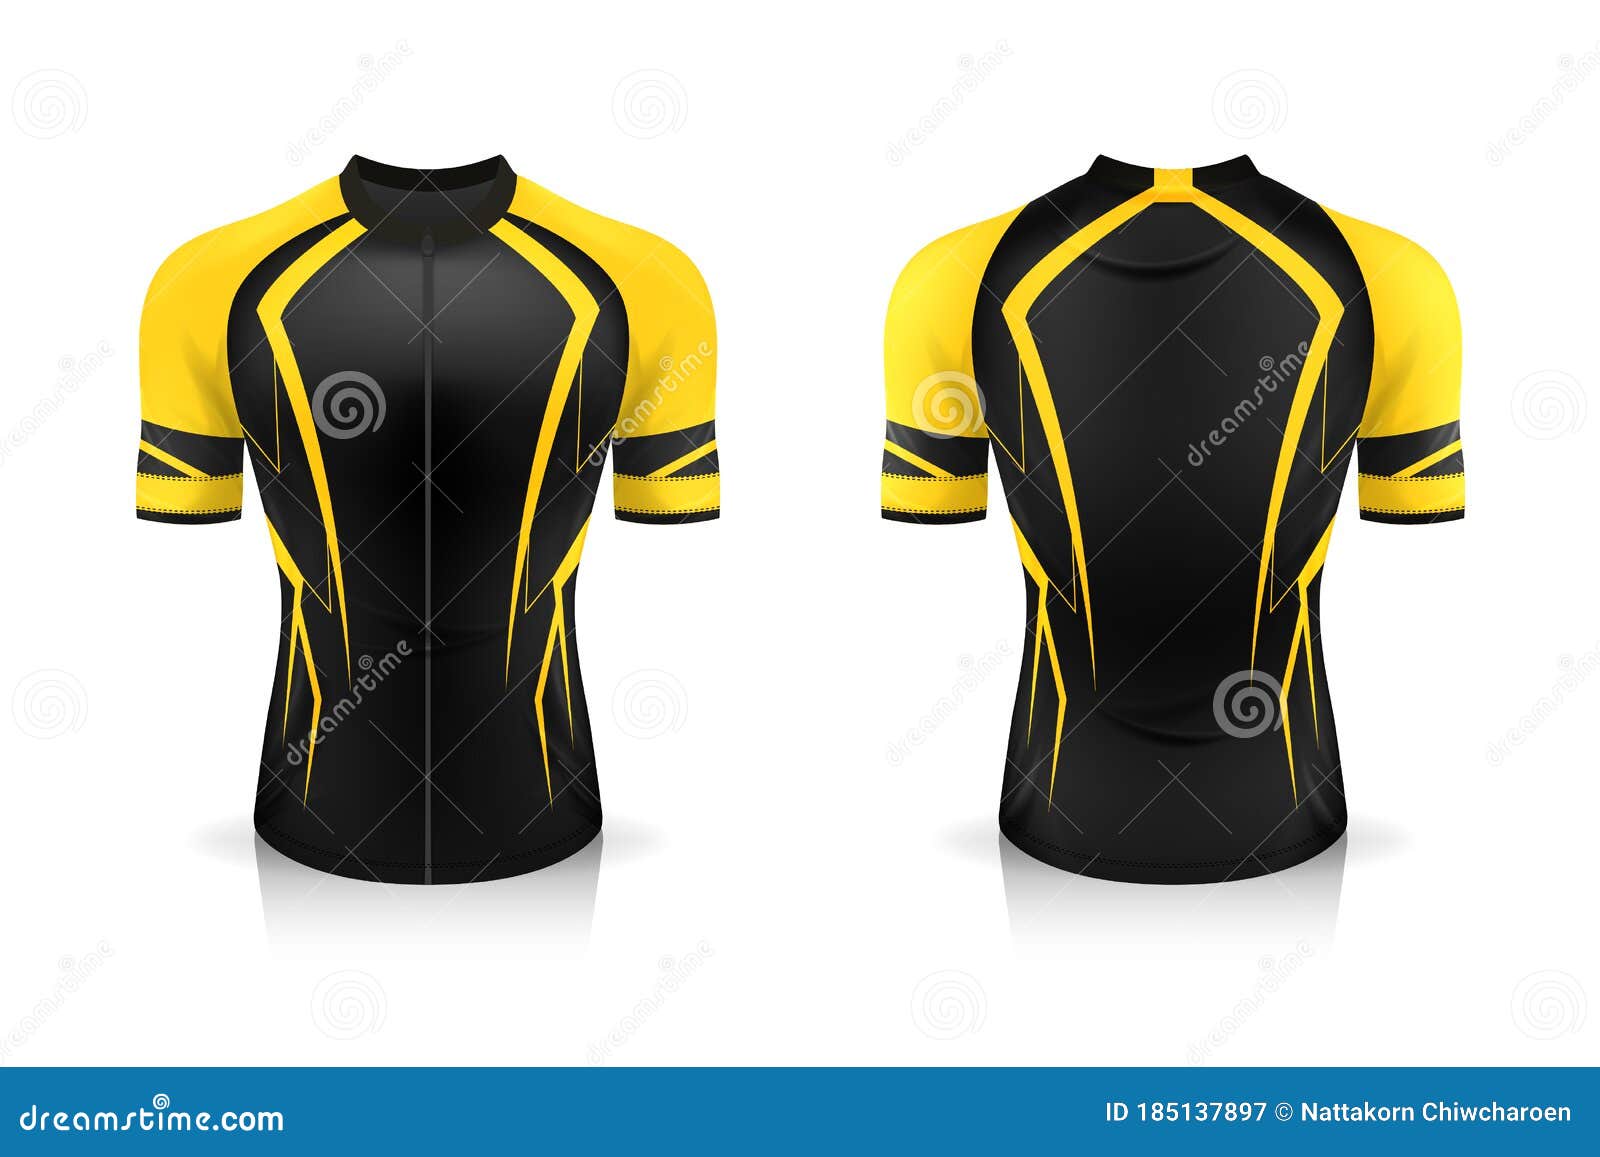 Download Specification Cycling Jersey Template Stock Vector ...